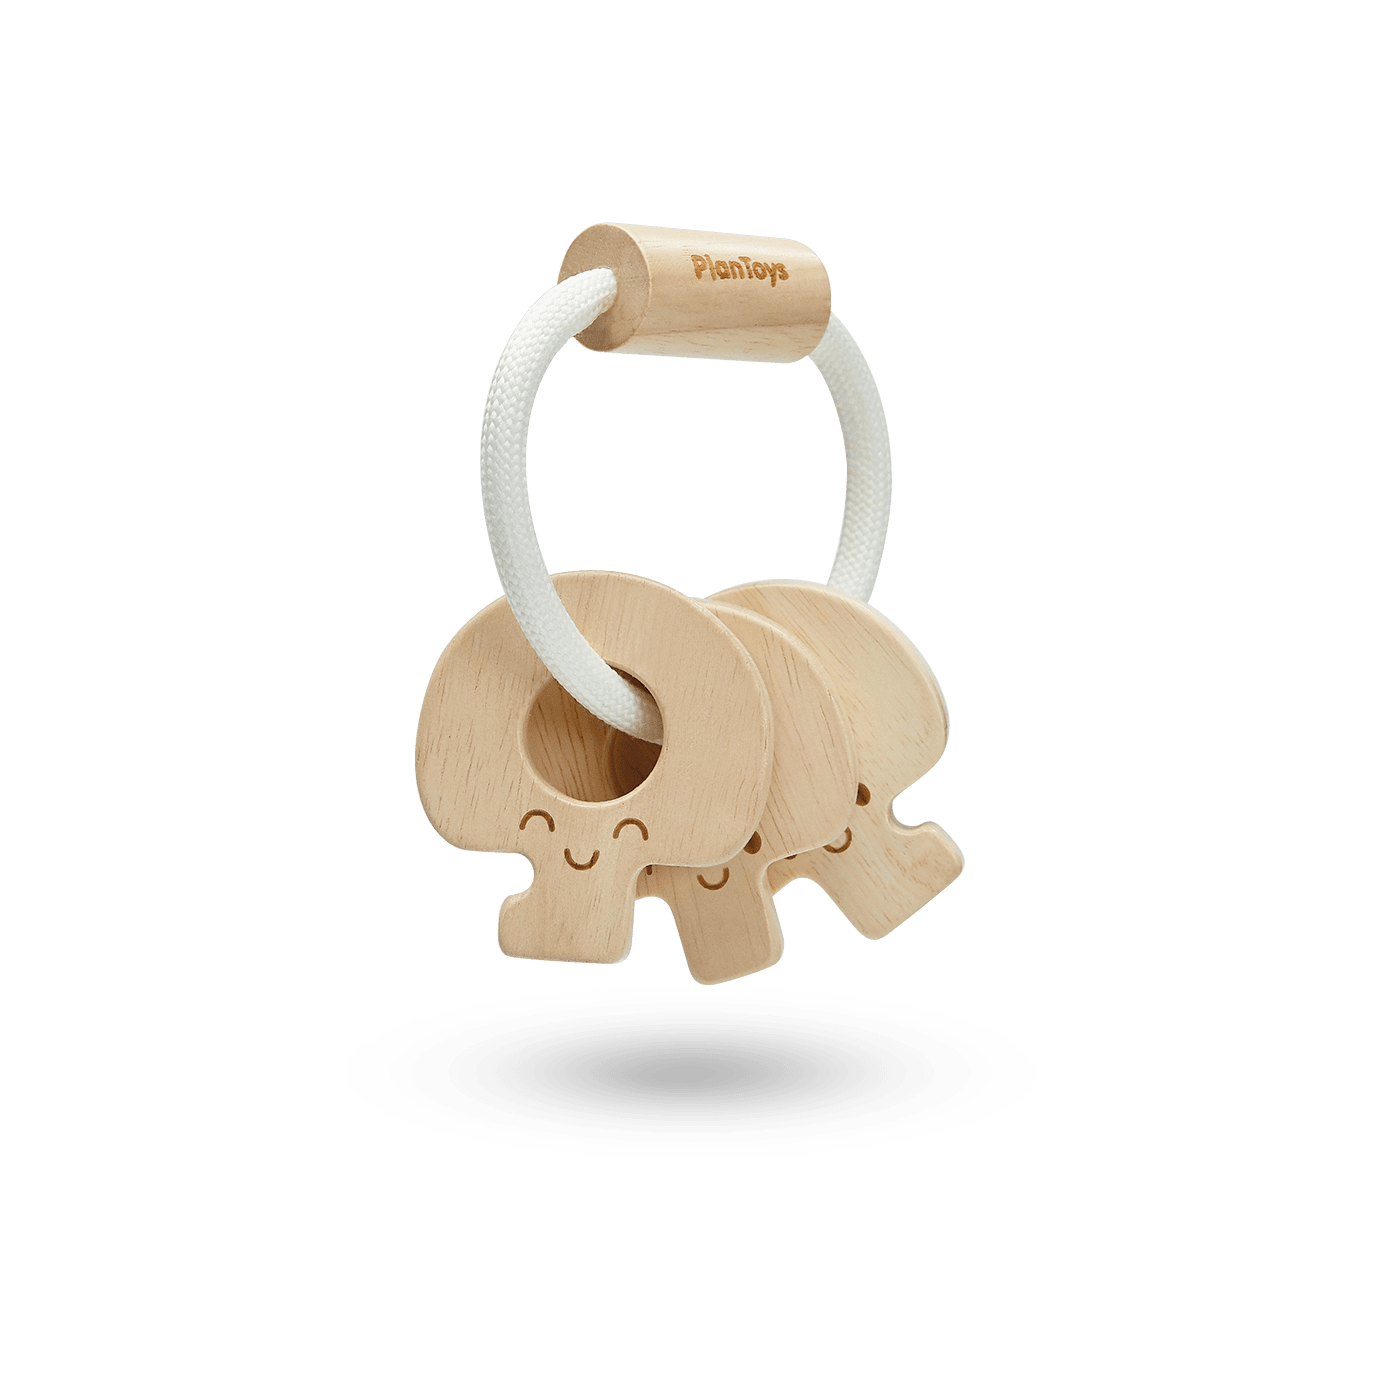 Plan Toys - Baby Key Rattle - Natural